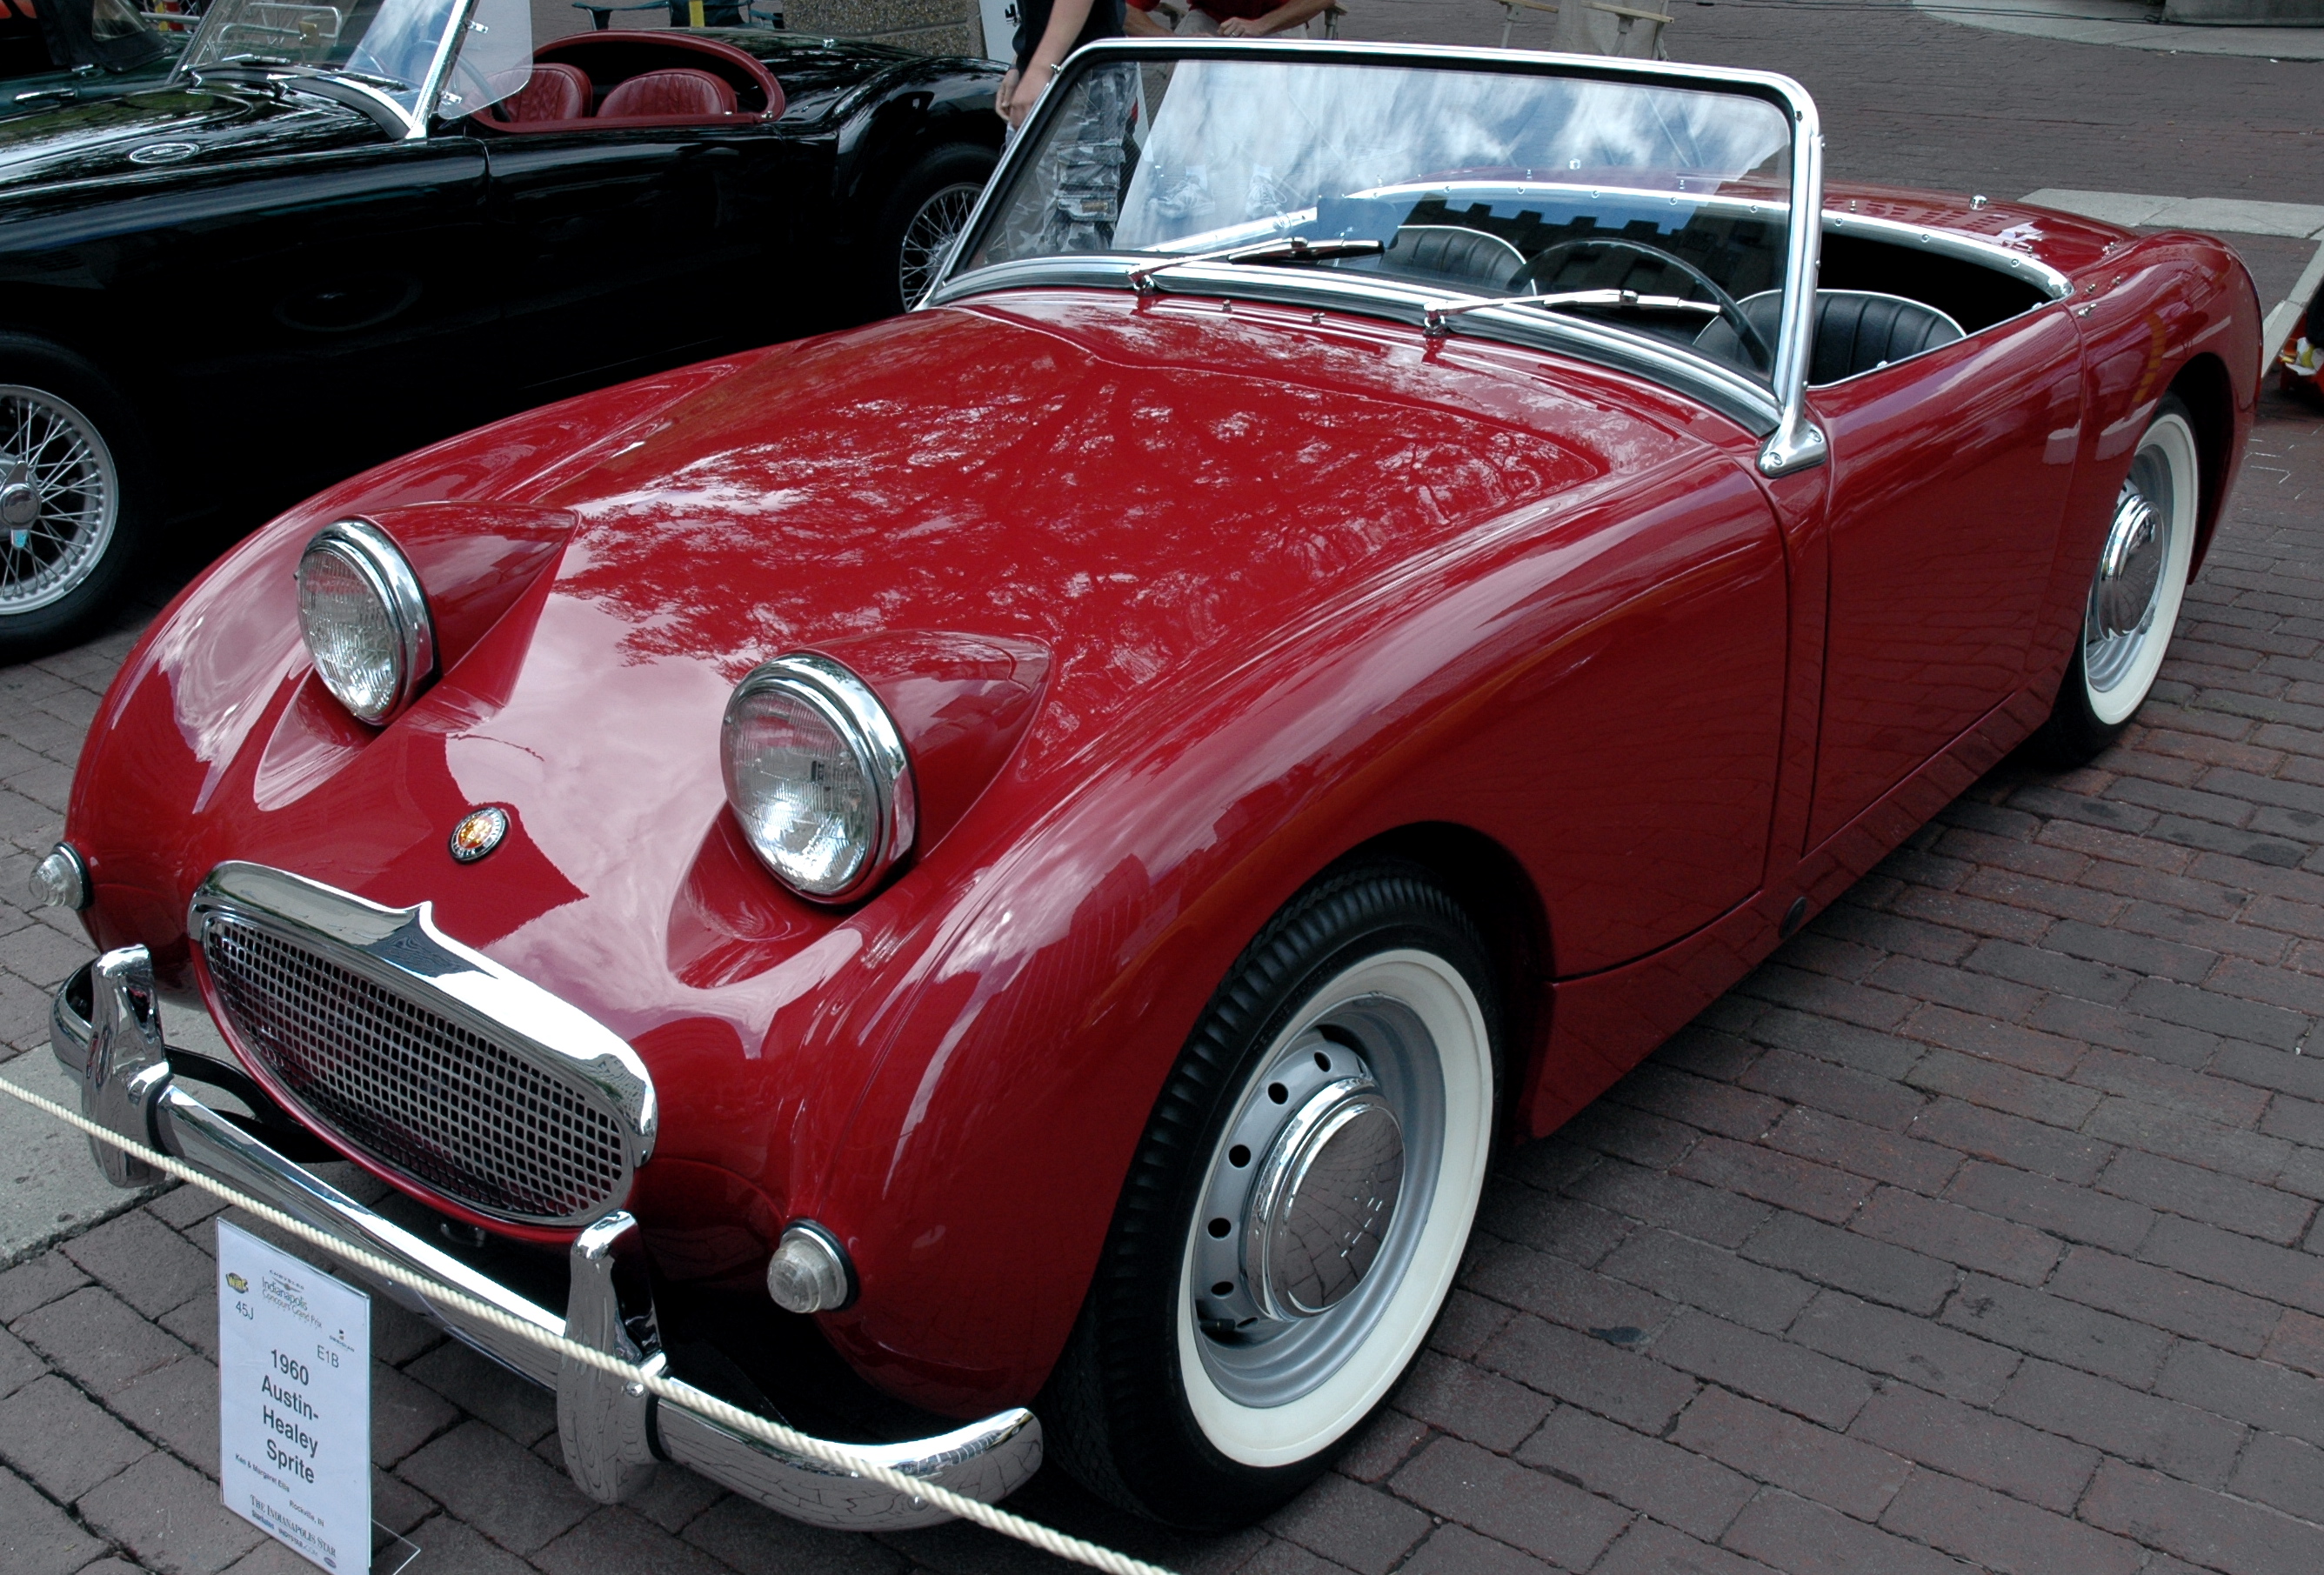 HQ Austin Healey Sprite Wallpapers | File 2024.19Kb